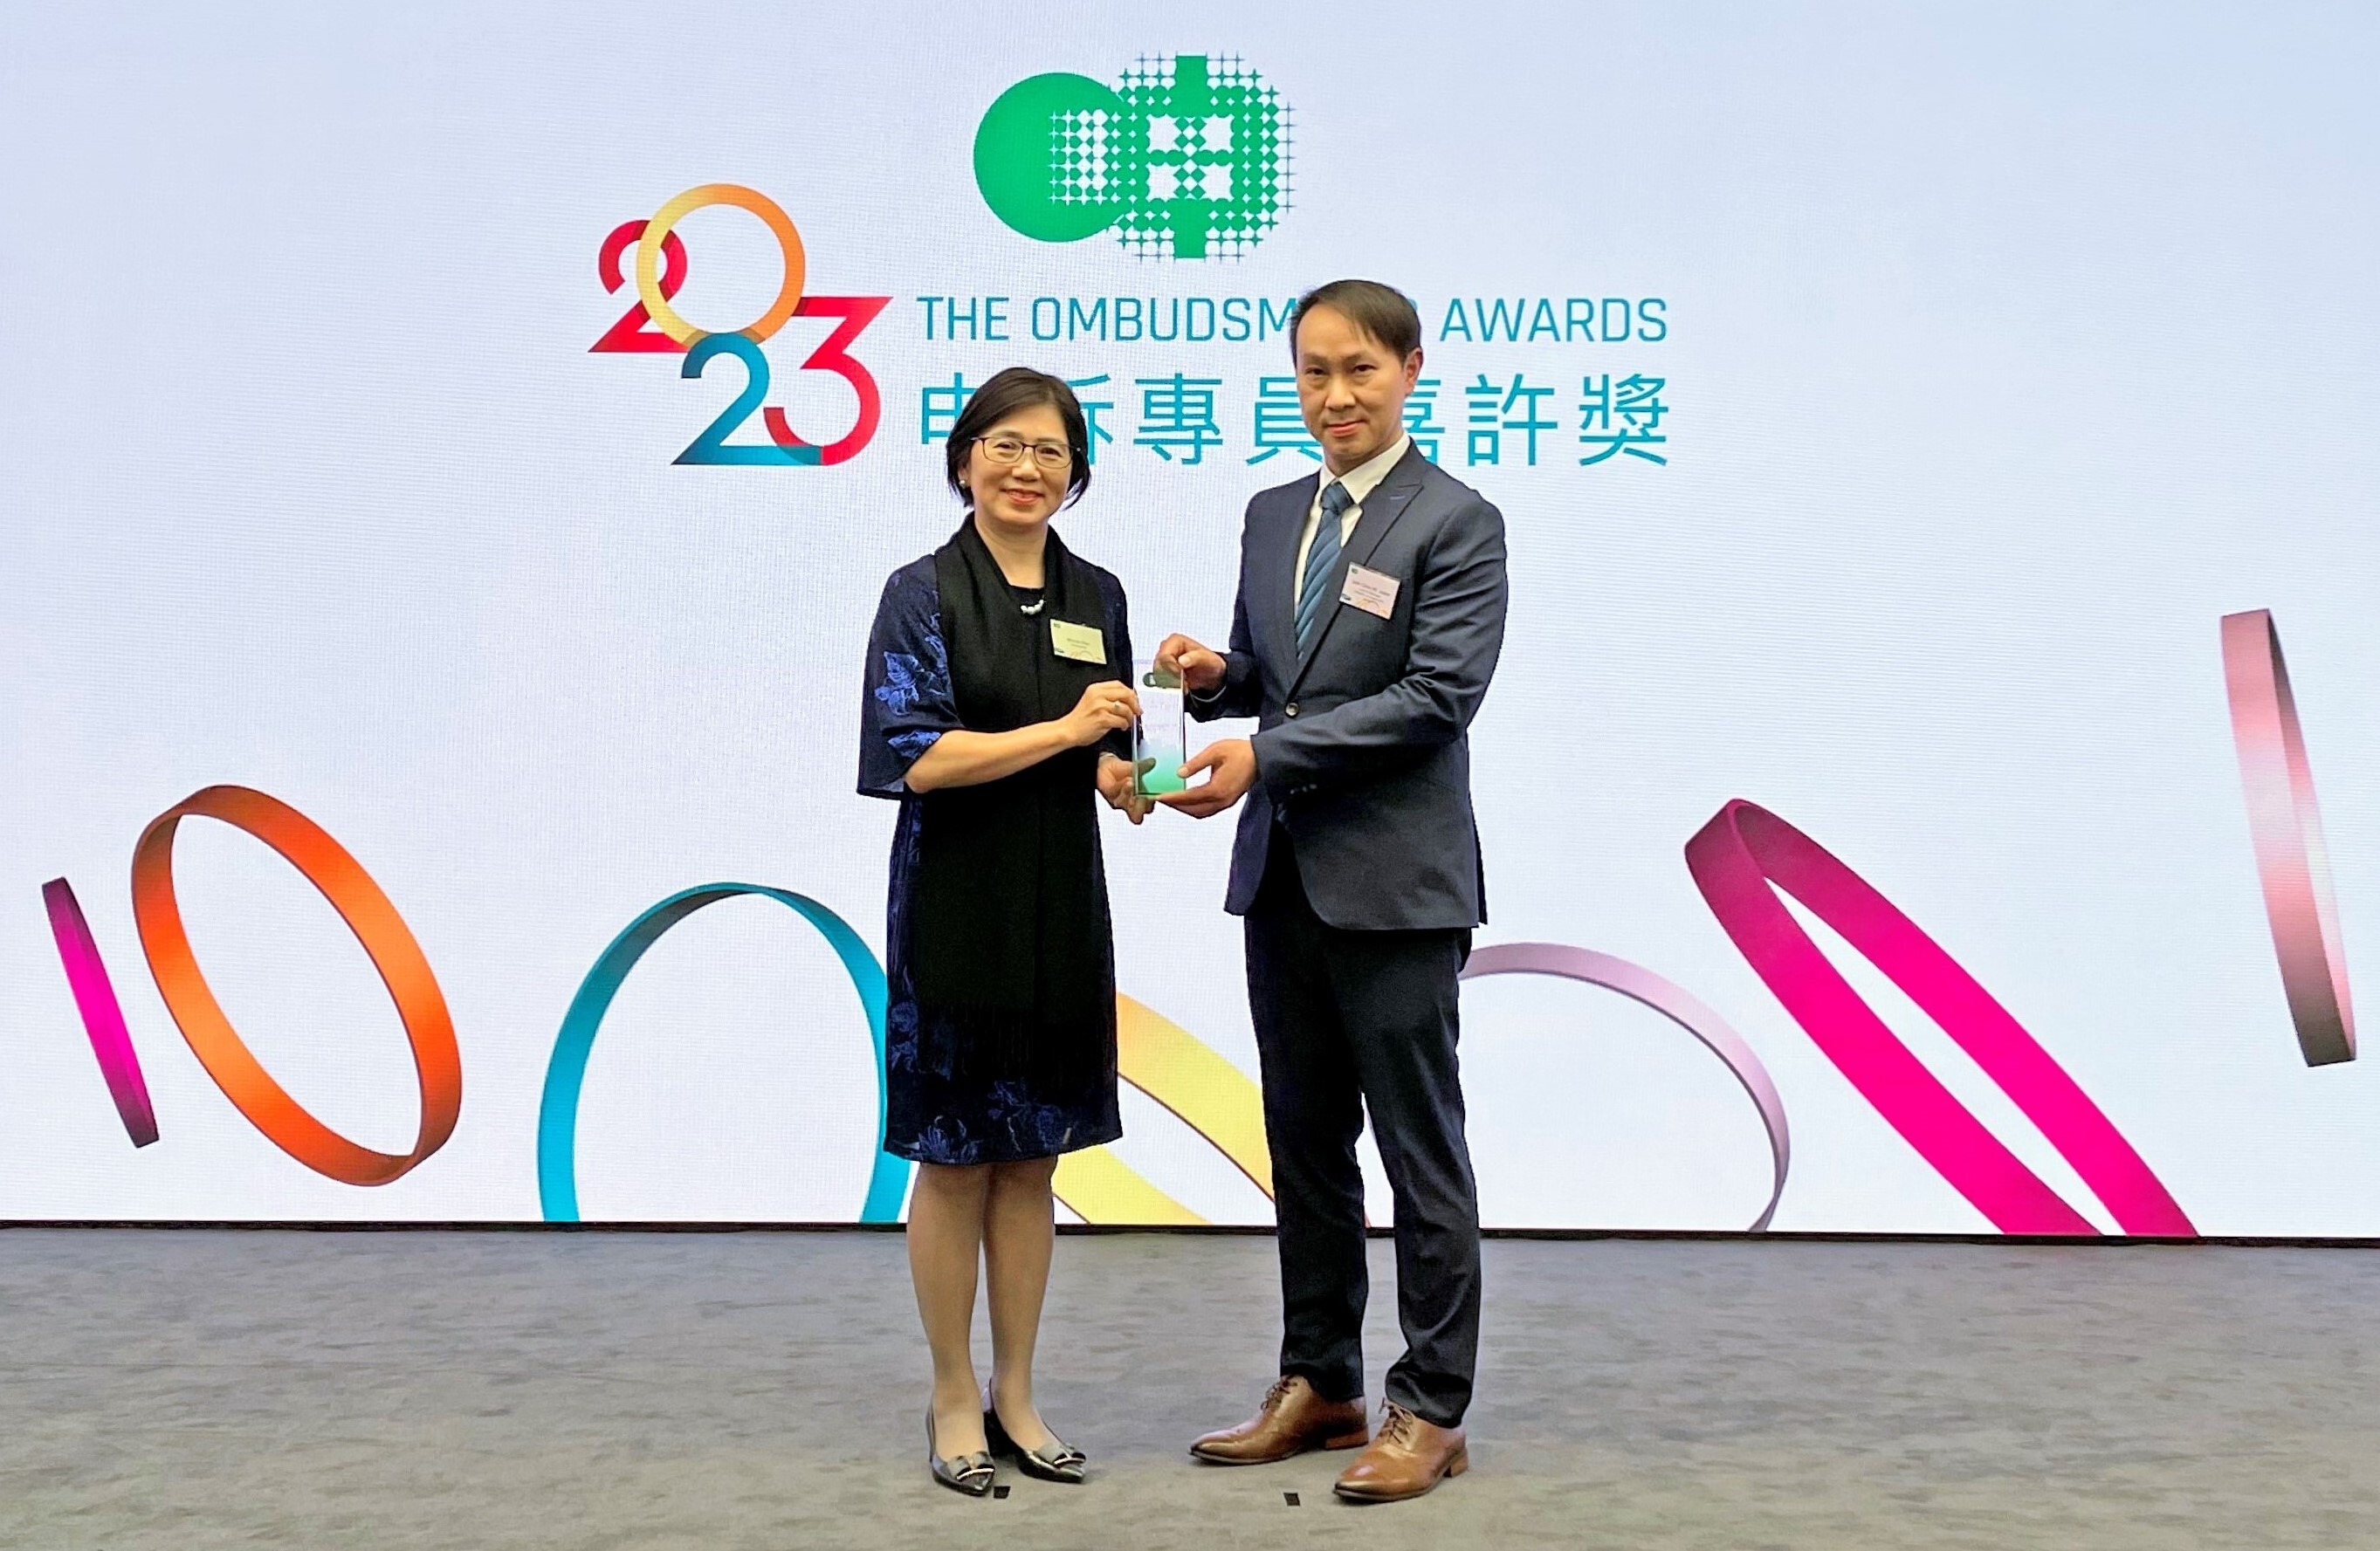 Jason Lam was commended by the Office of The Ombudsman with Ombudsman's Awards 2023 for Officers of Public Organisations.